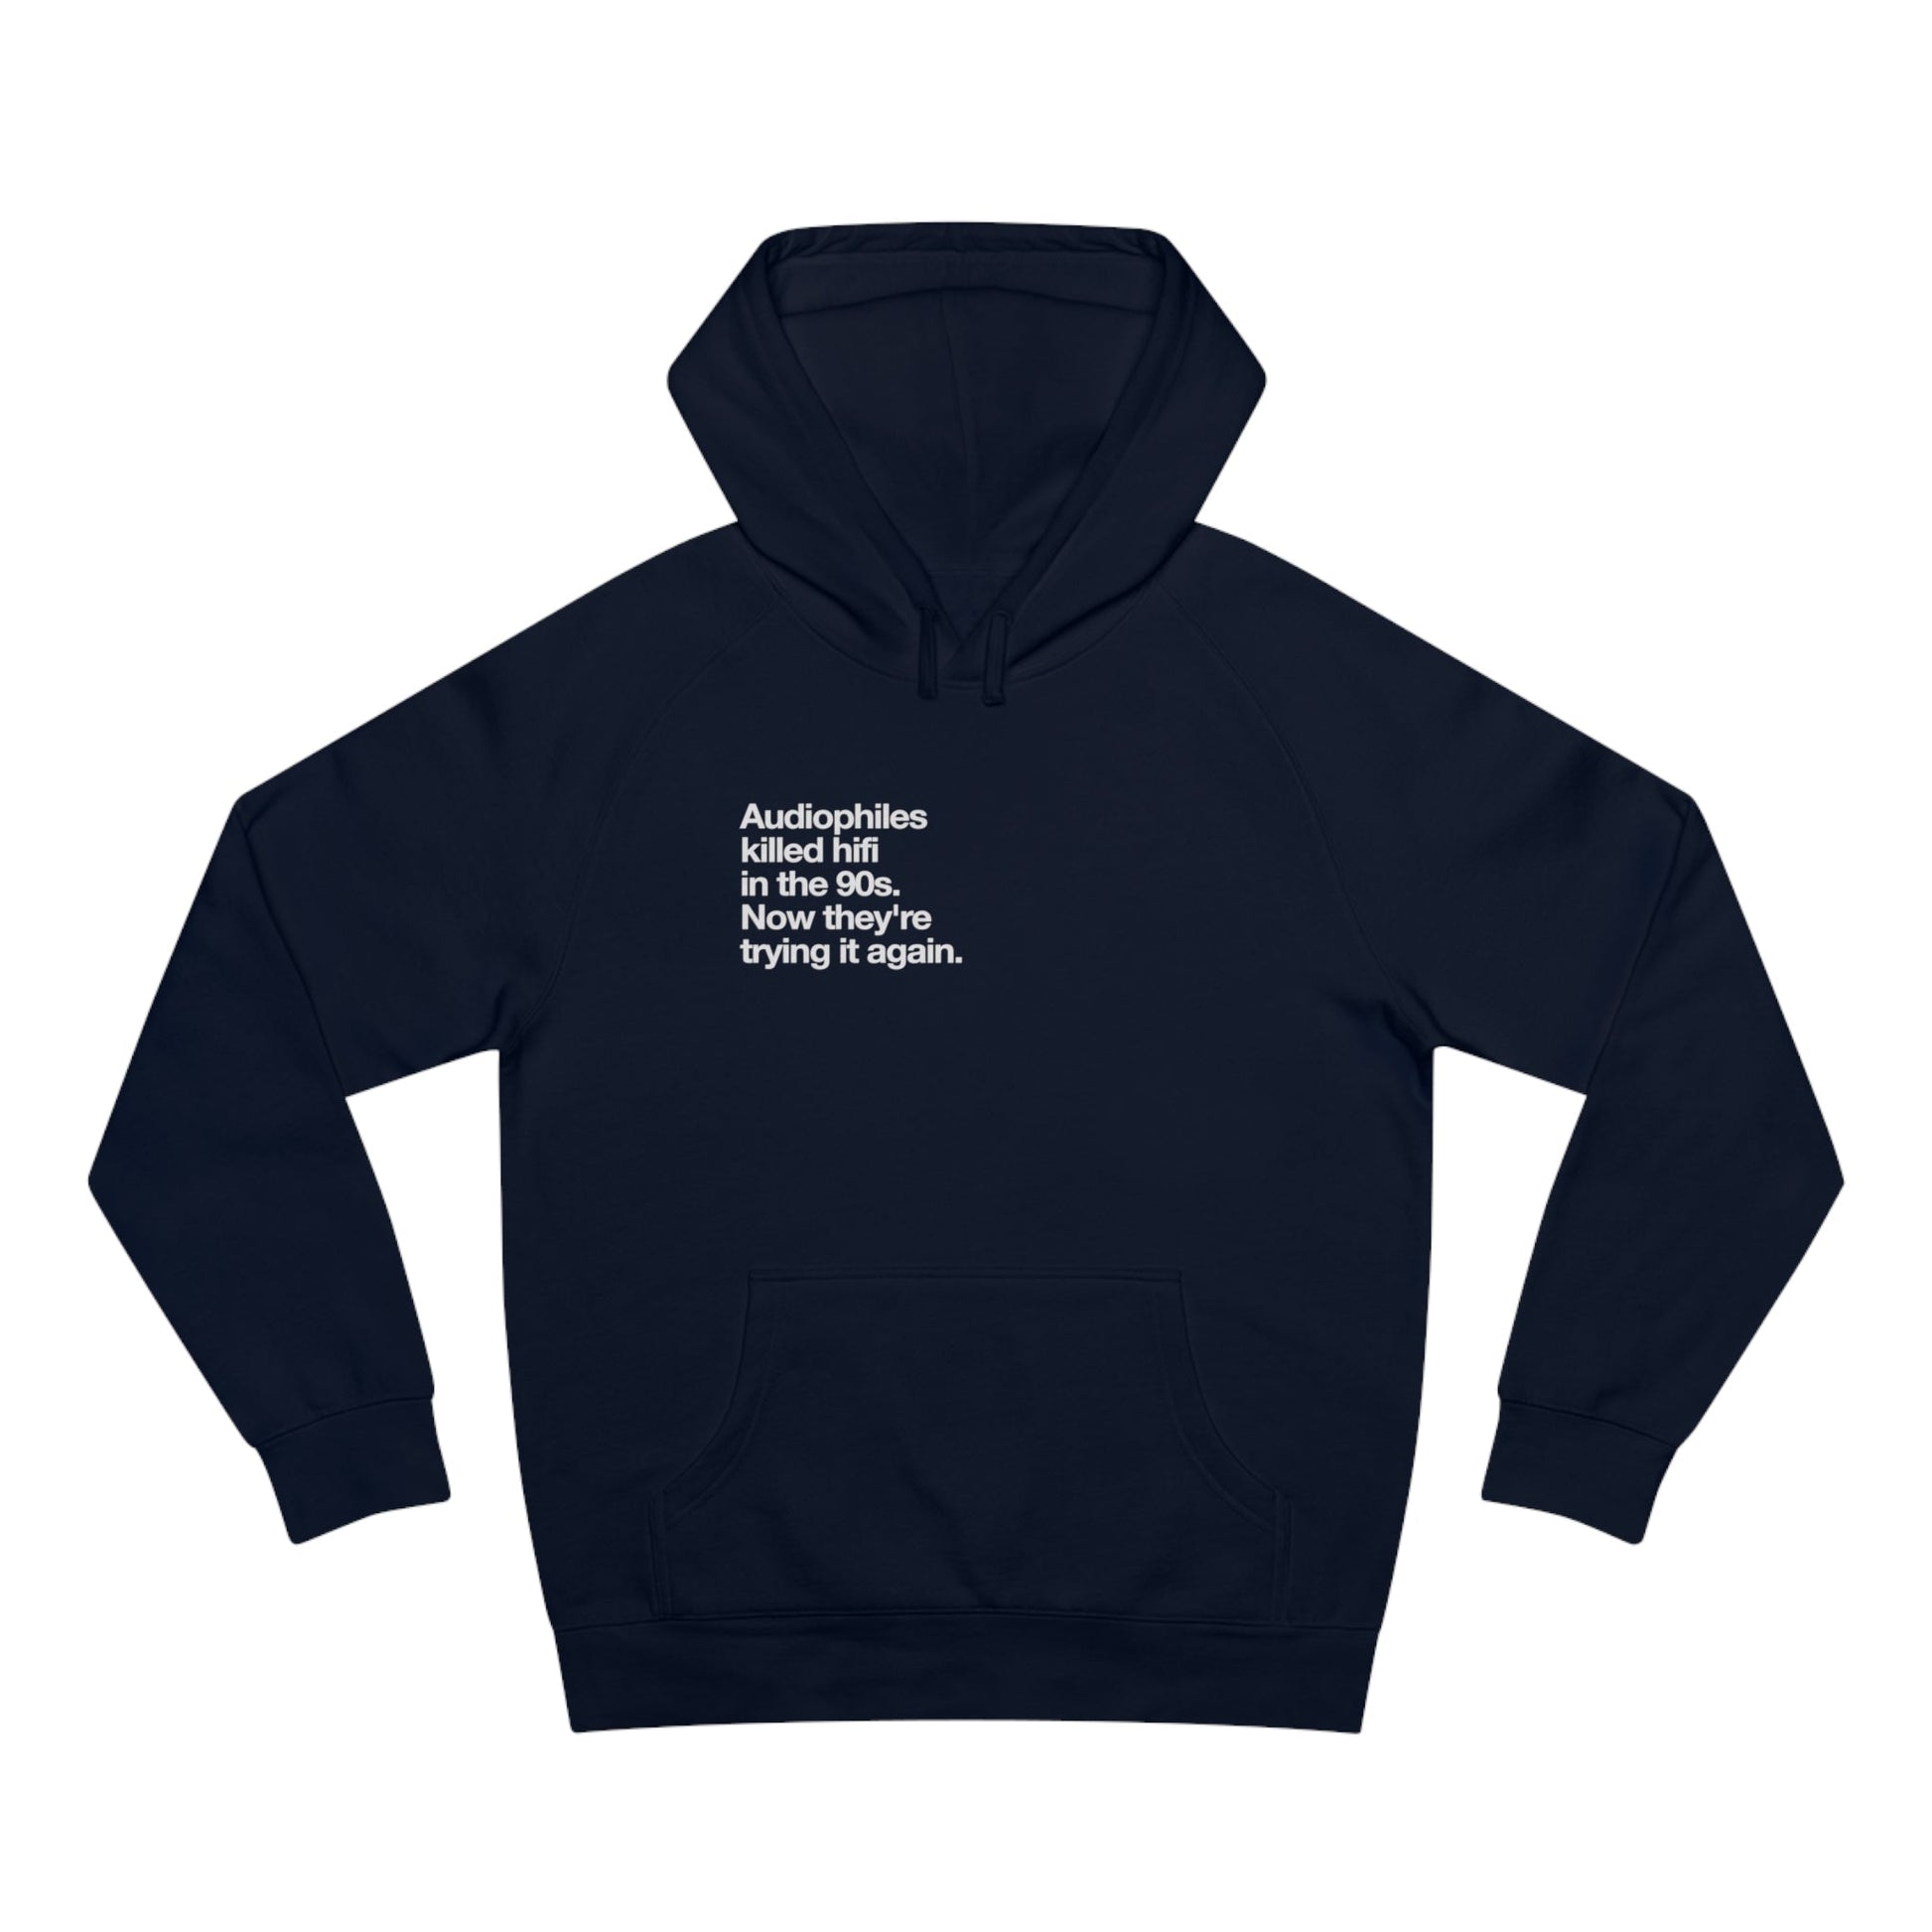 Audiophiles killed hifi in the 90s hoodie - Pure Neo Shop